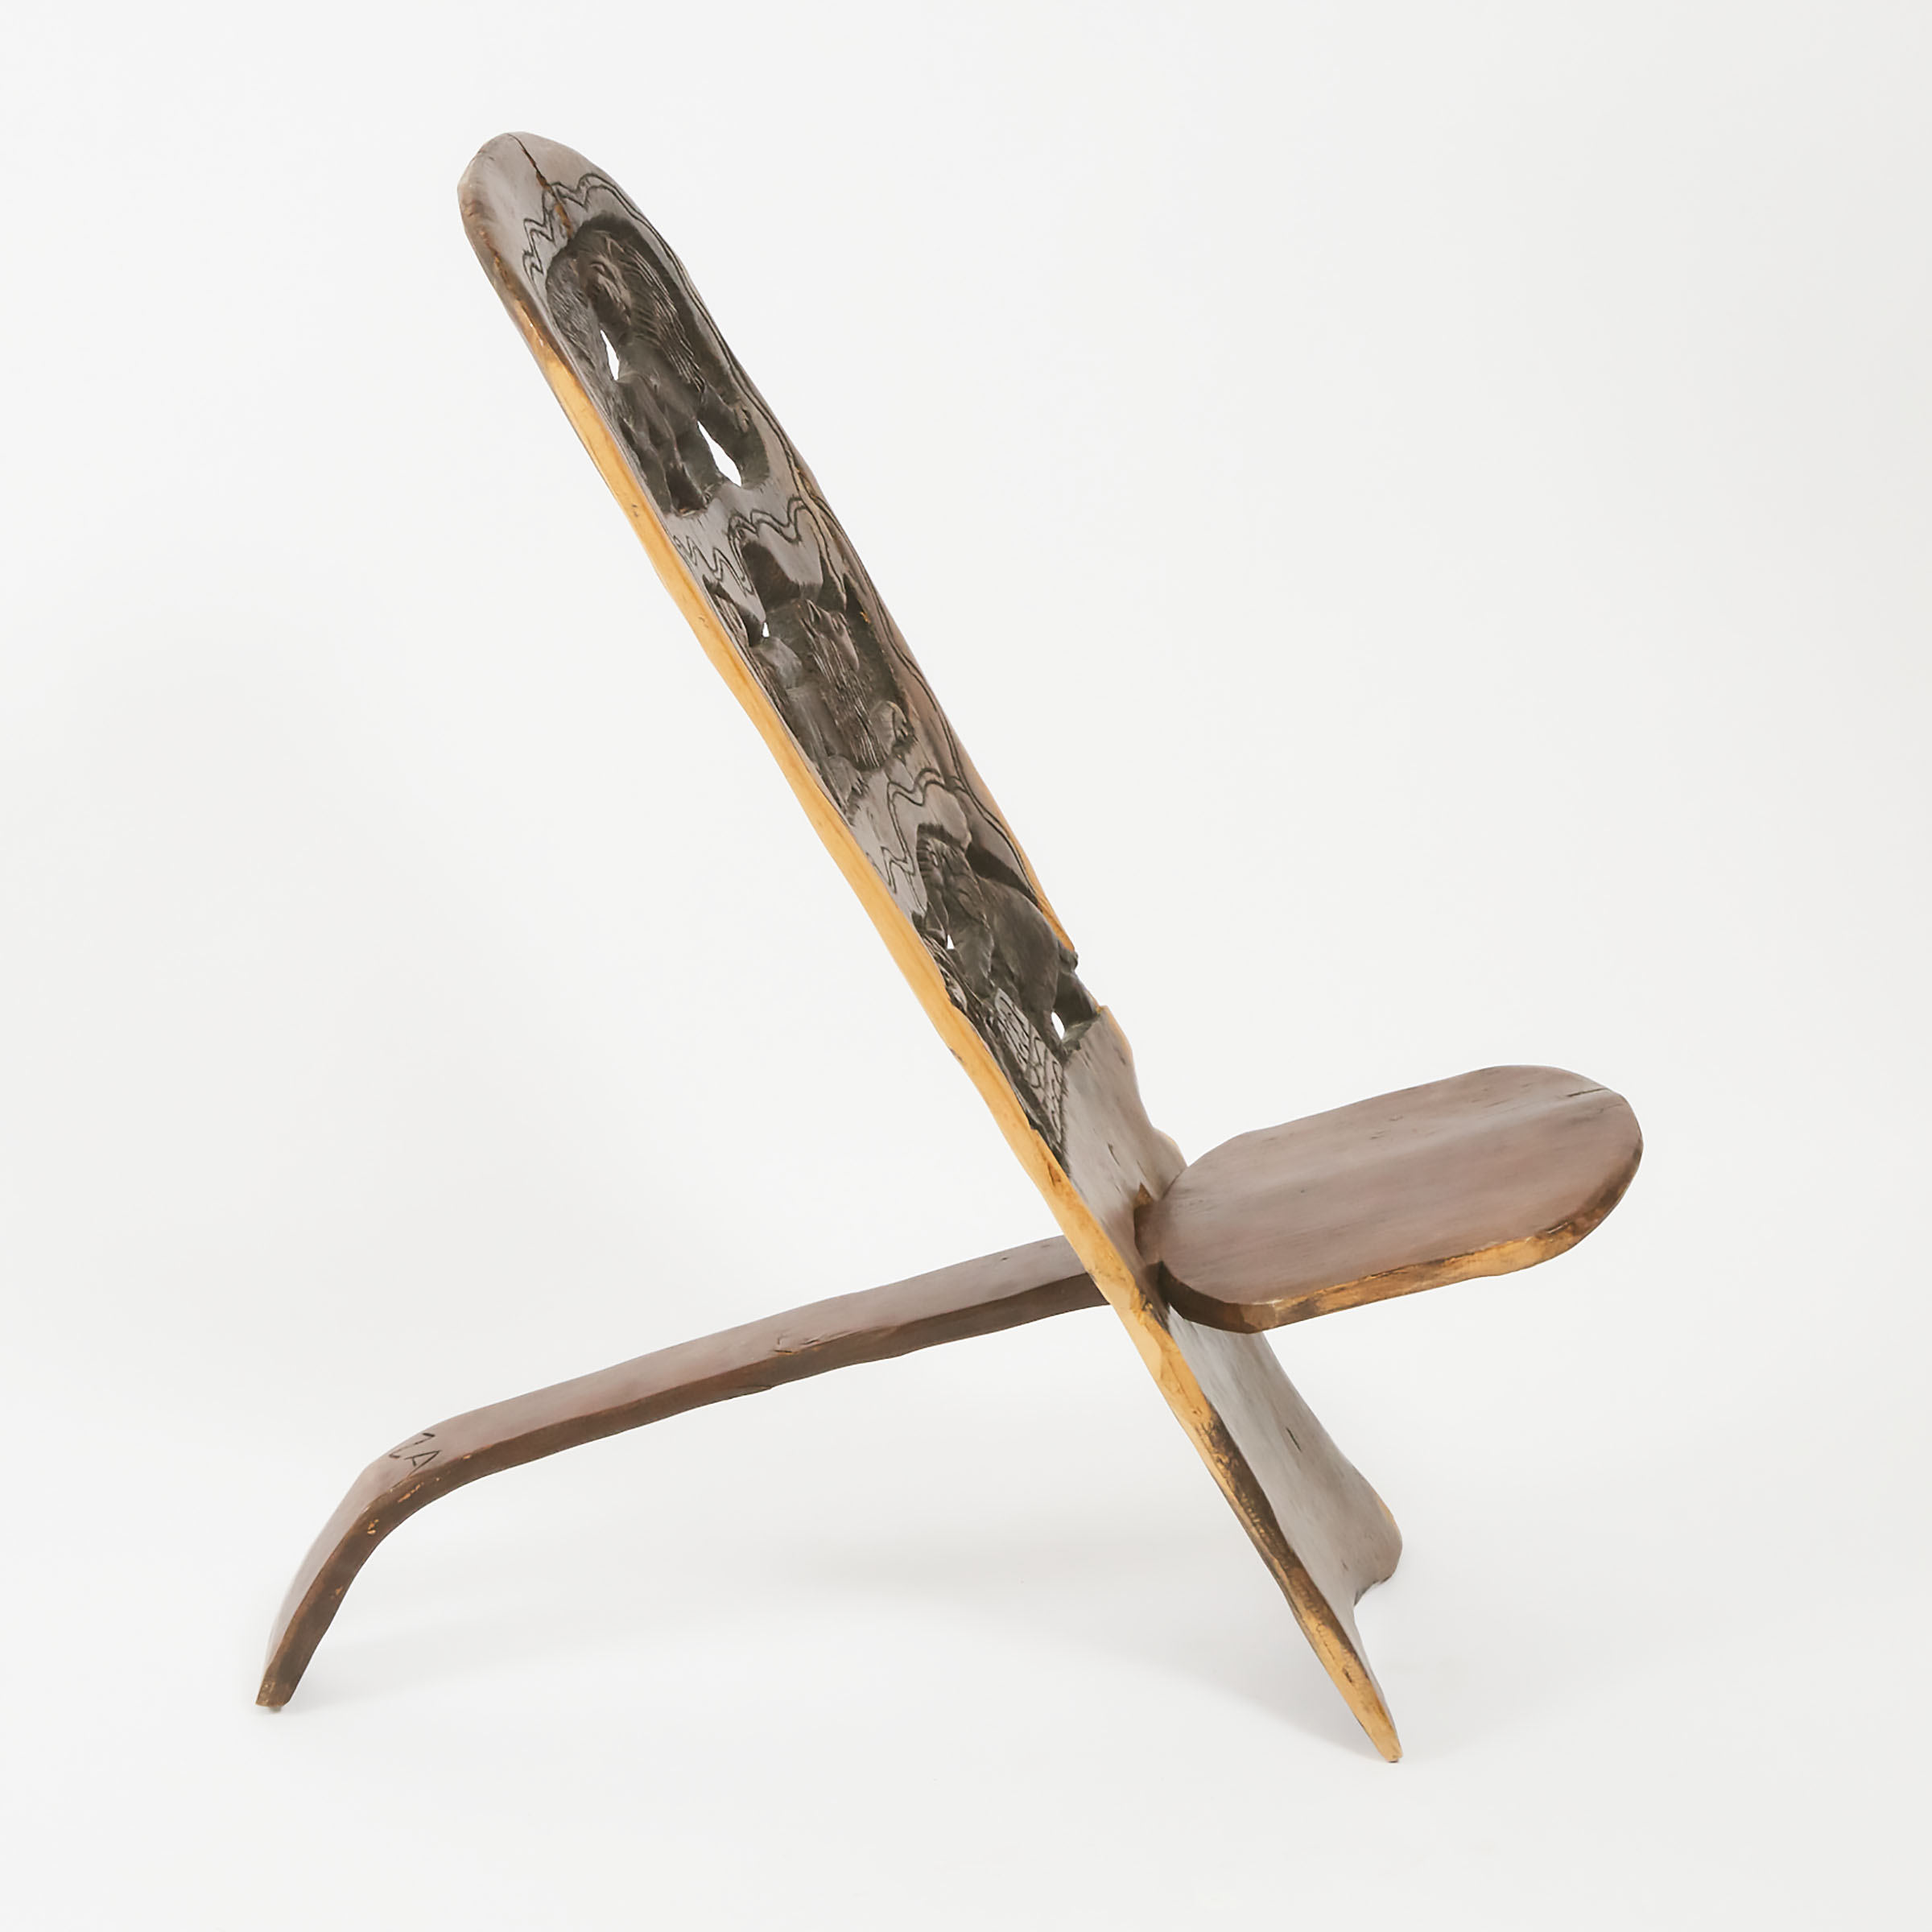 African Relief Carved Hardwood Birthing Chair, mid to late 20th century